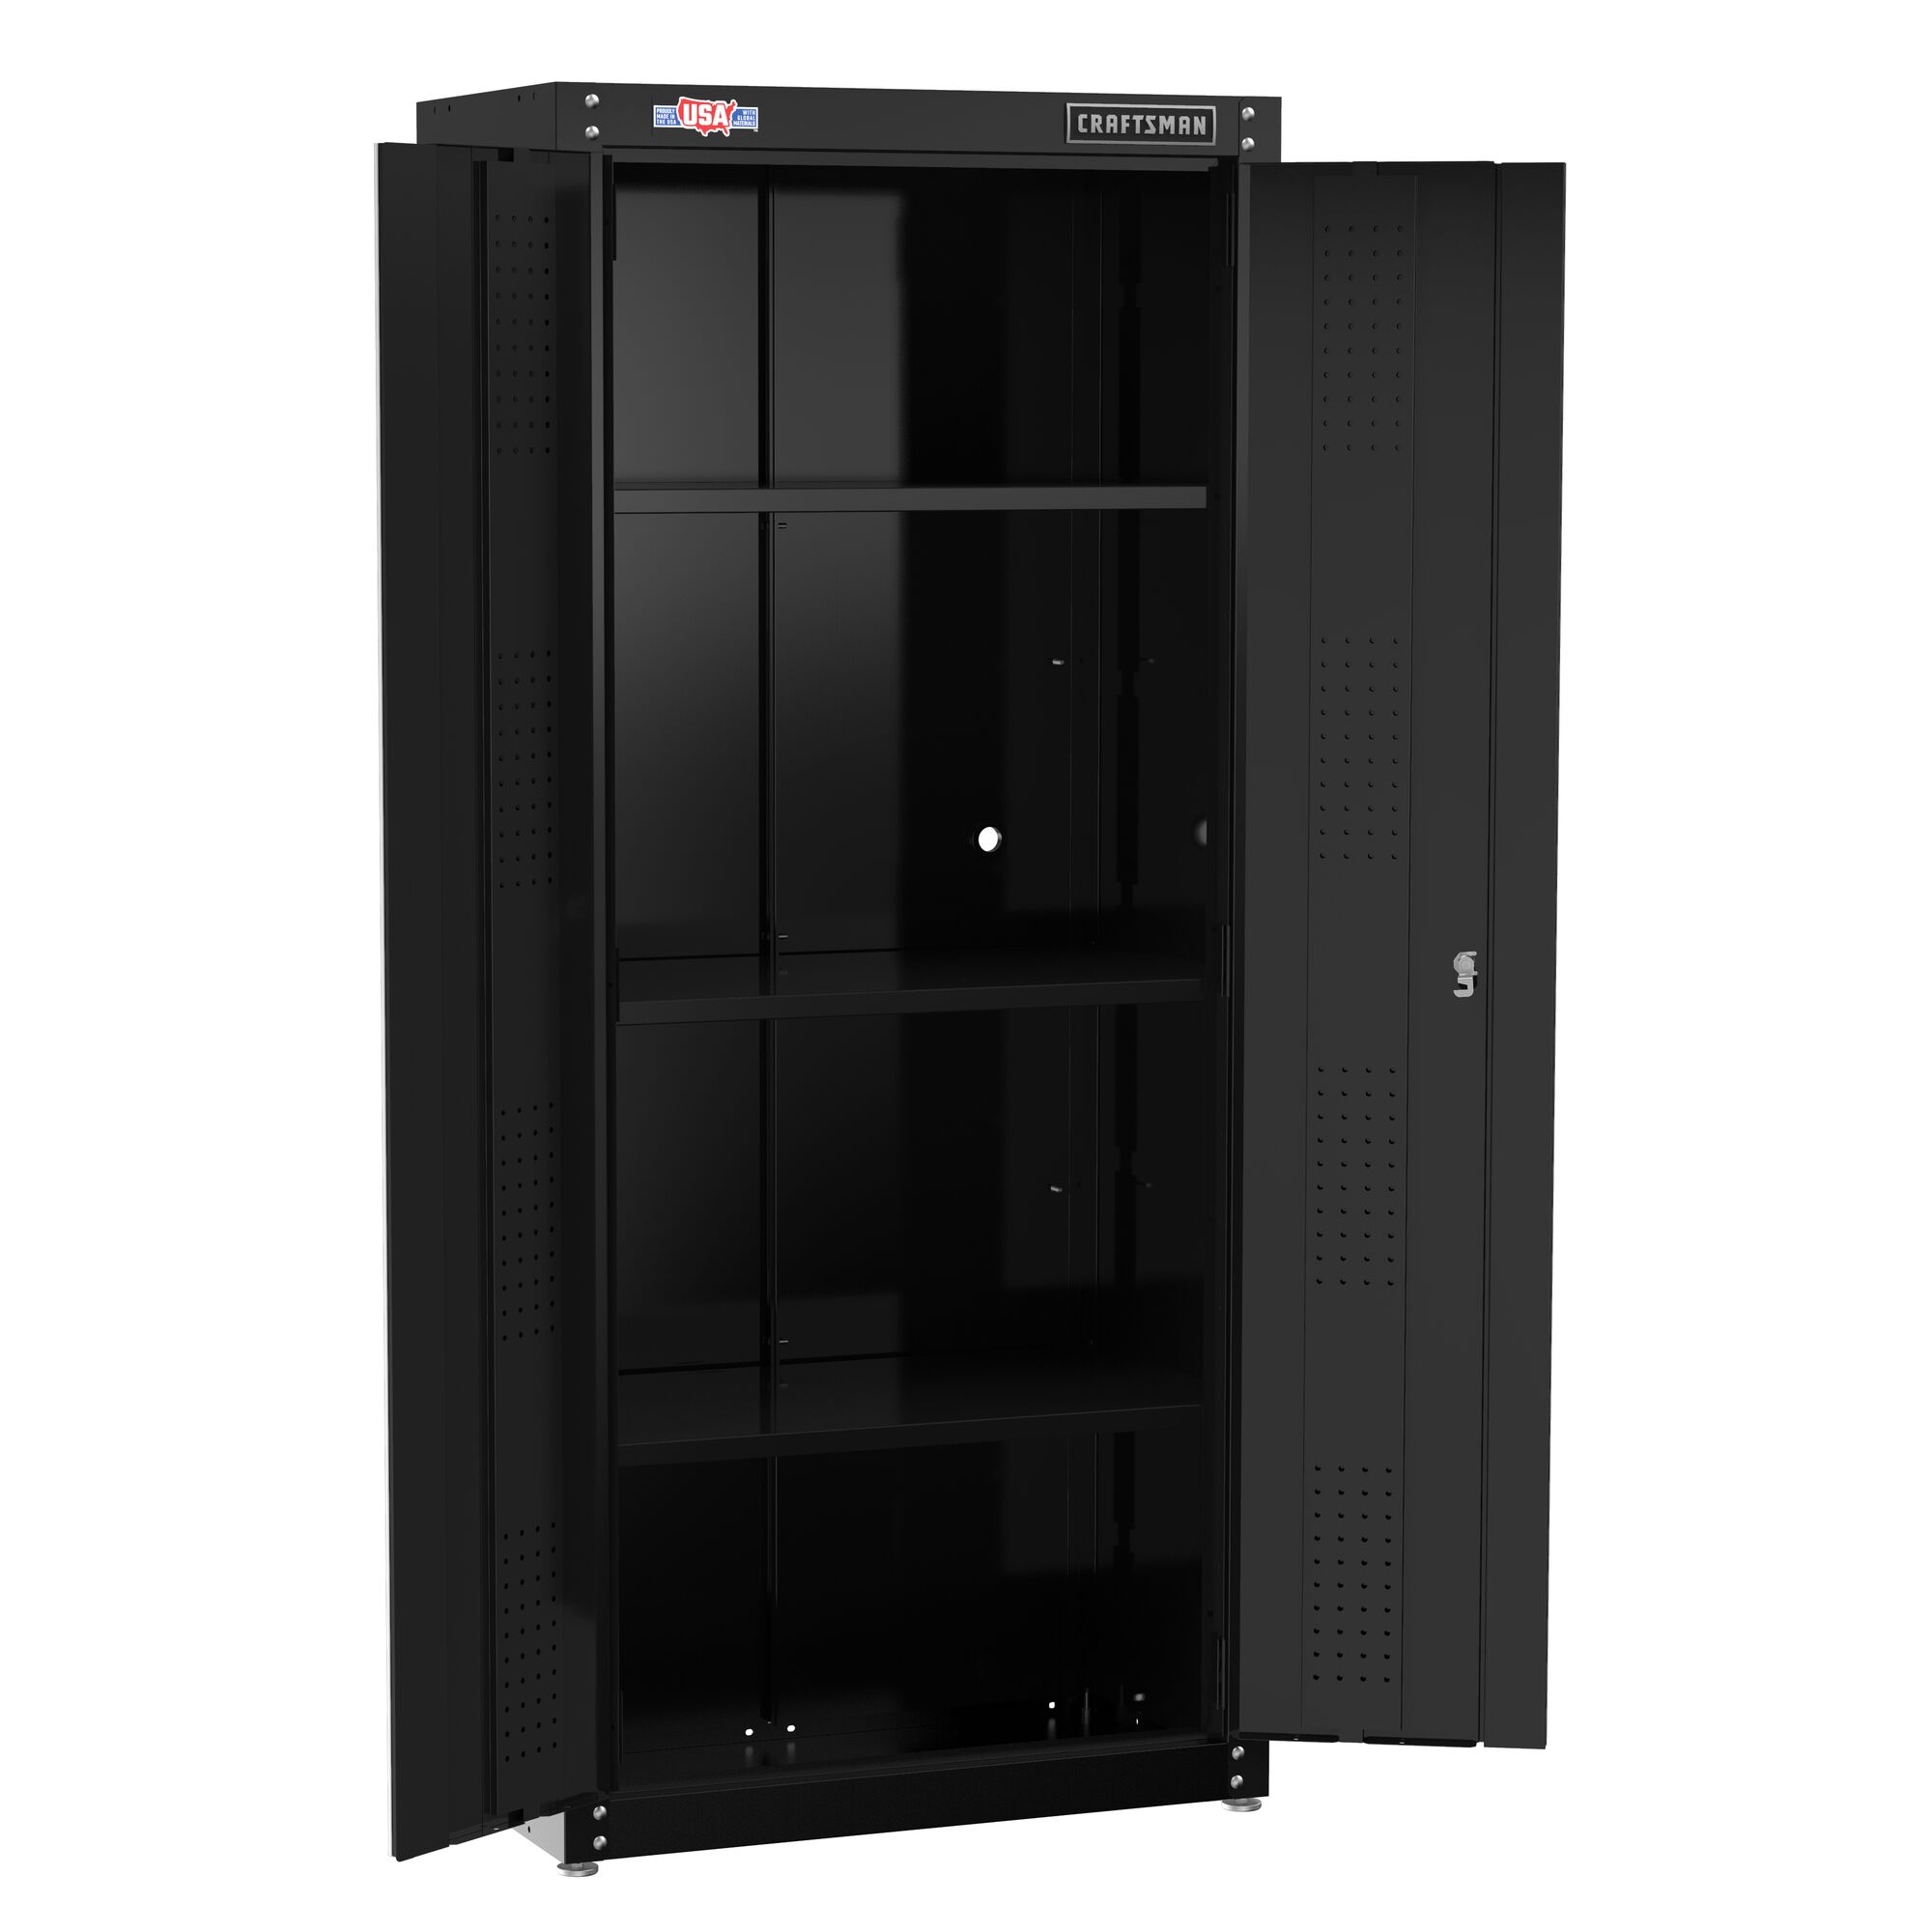 CRAFTSMAN 32-in wide storage cabinet angled view with doors open